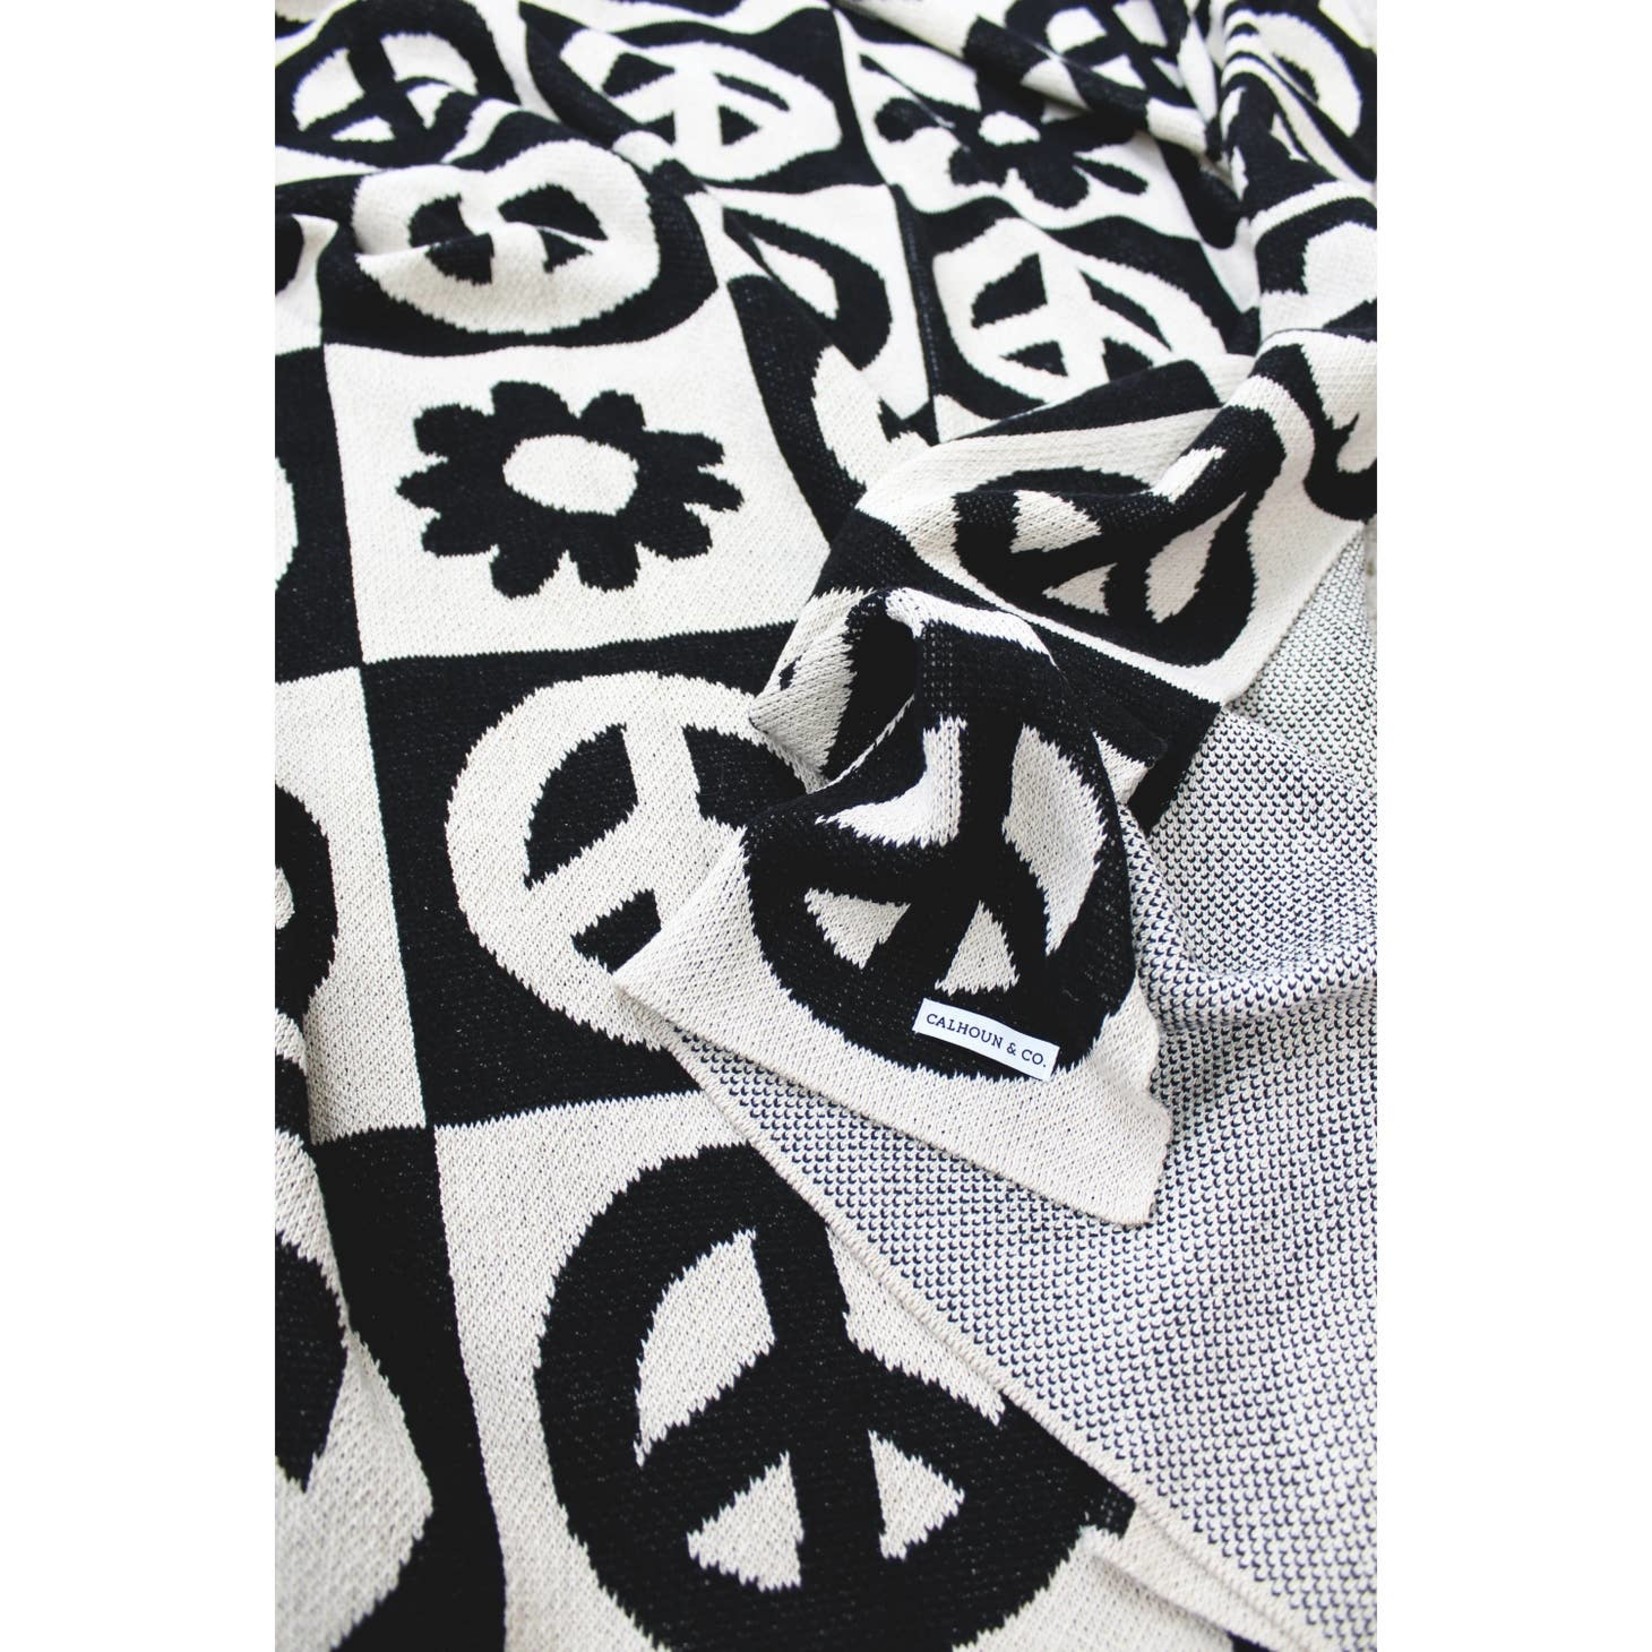 Calhoun & Co. Peace Please Checkered Knit Throw Blanket with Flowers